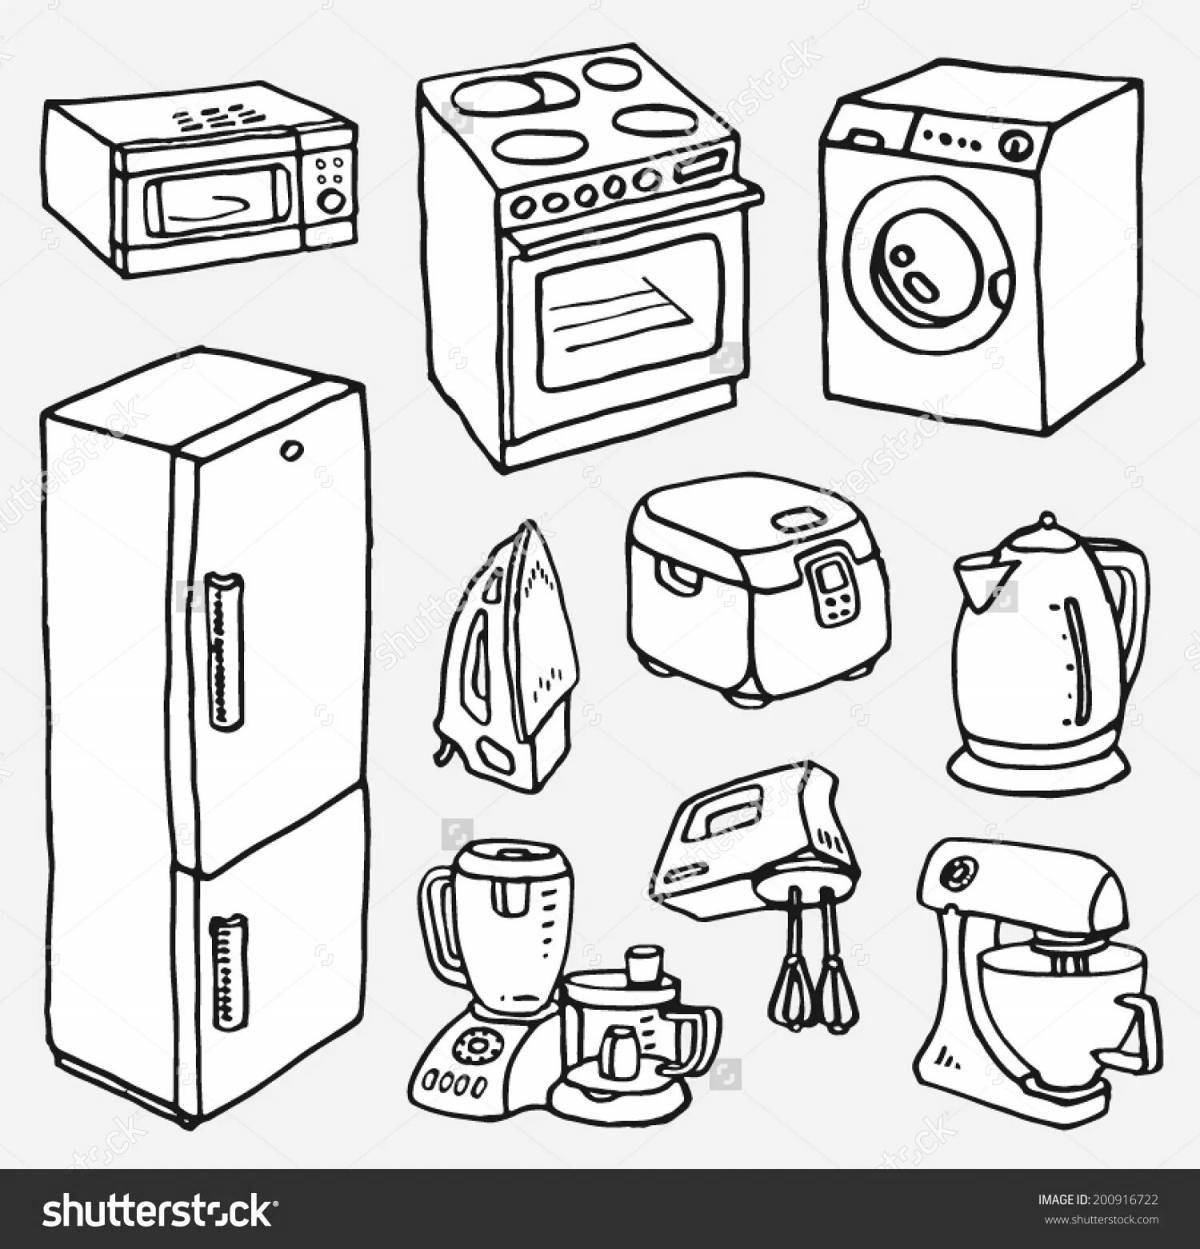 Creative electrical appliances coloring book for 5-6 year olds